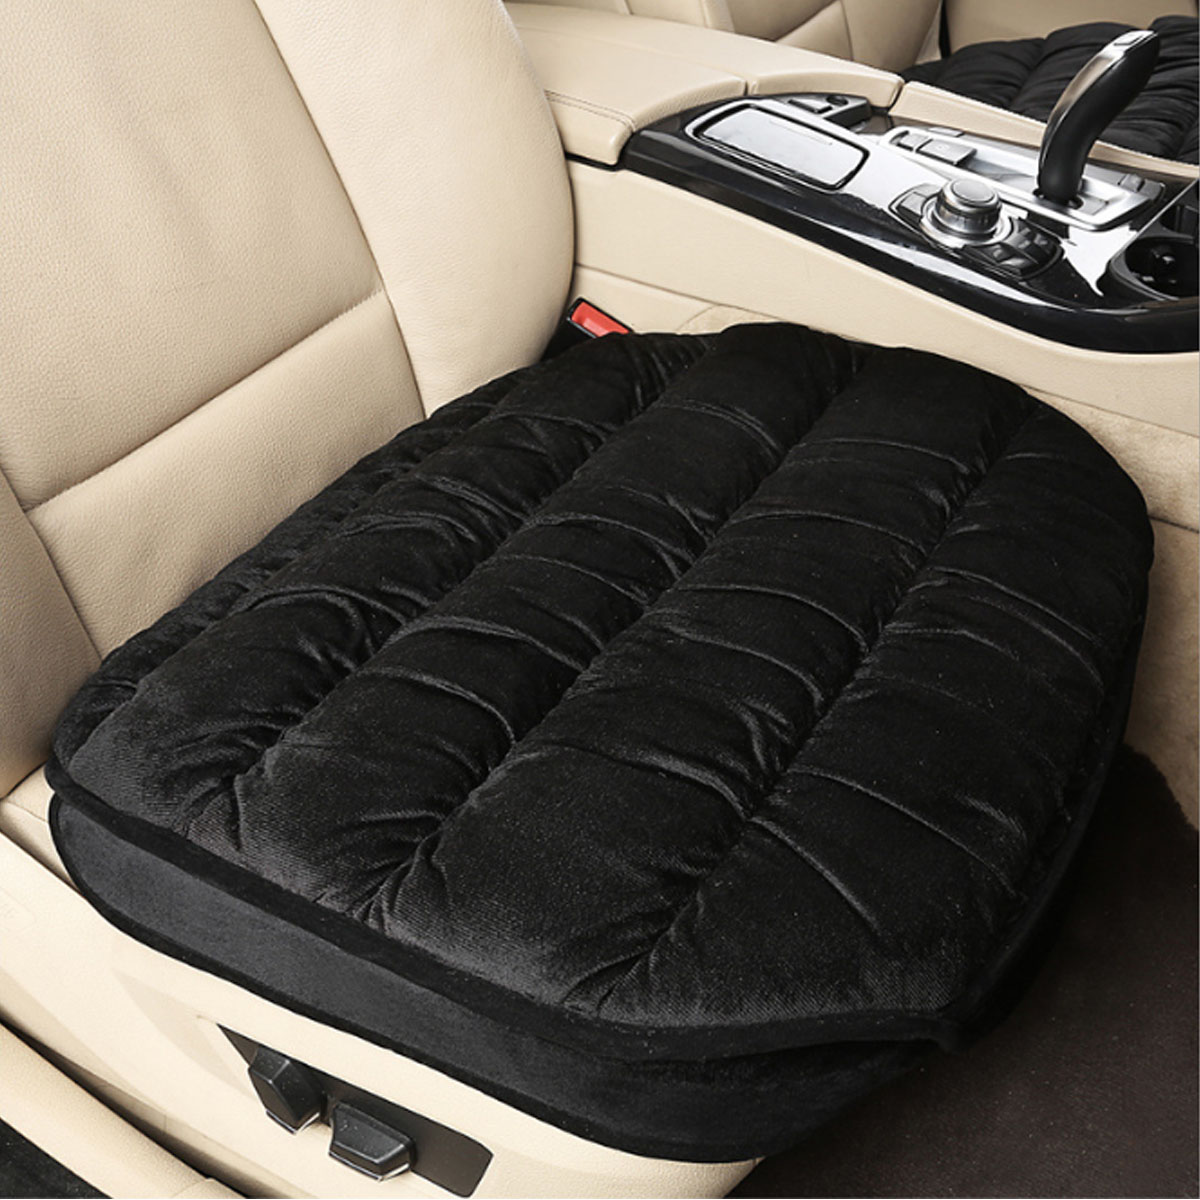 Universal-Car-Front-Seat-Cover-Soft-Plush-Breathable-Pads-Winter-Chair-Cushion-1628307-3